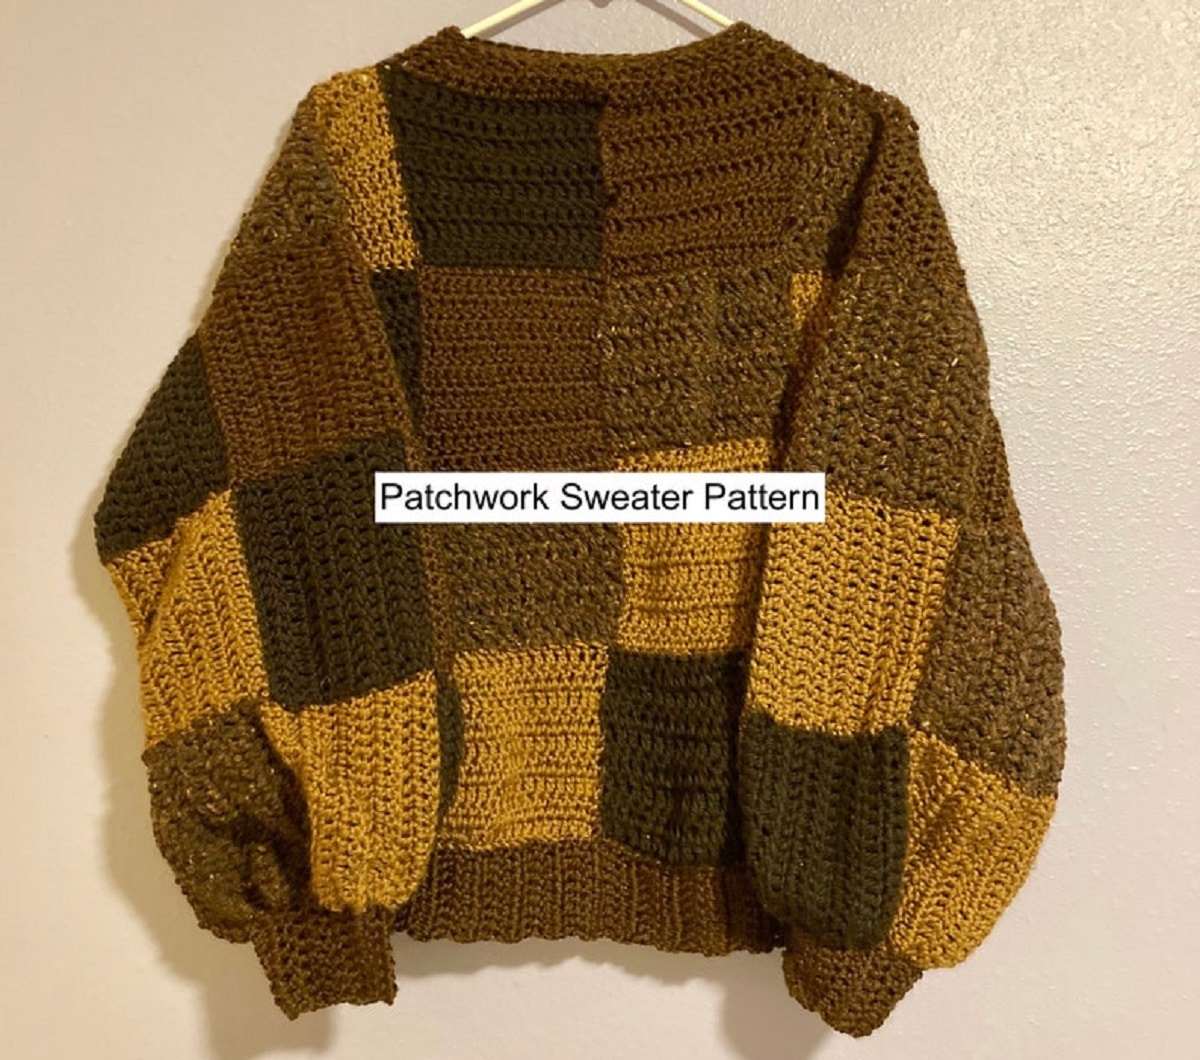 A brown and yellow long sleeved crochet patchwork sweater with a round neckline and cuffed sleeves on a hanger.